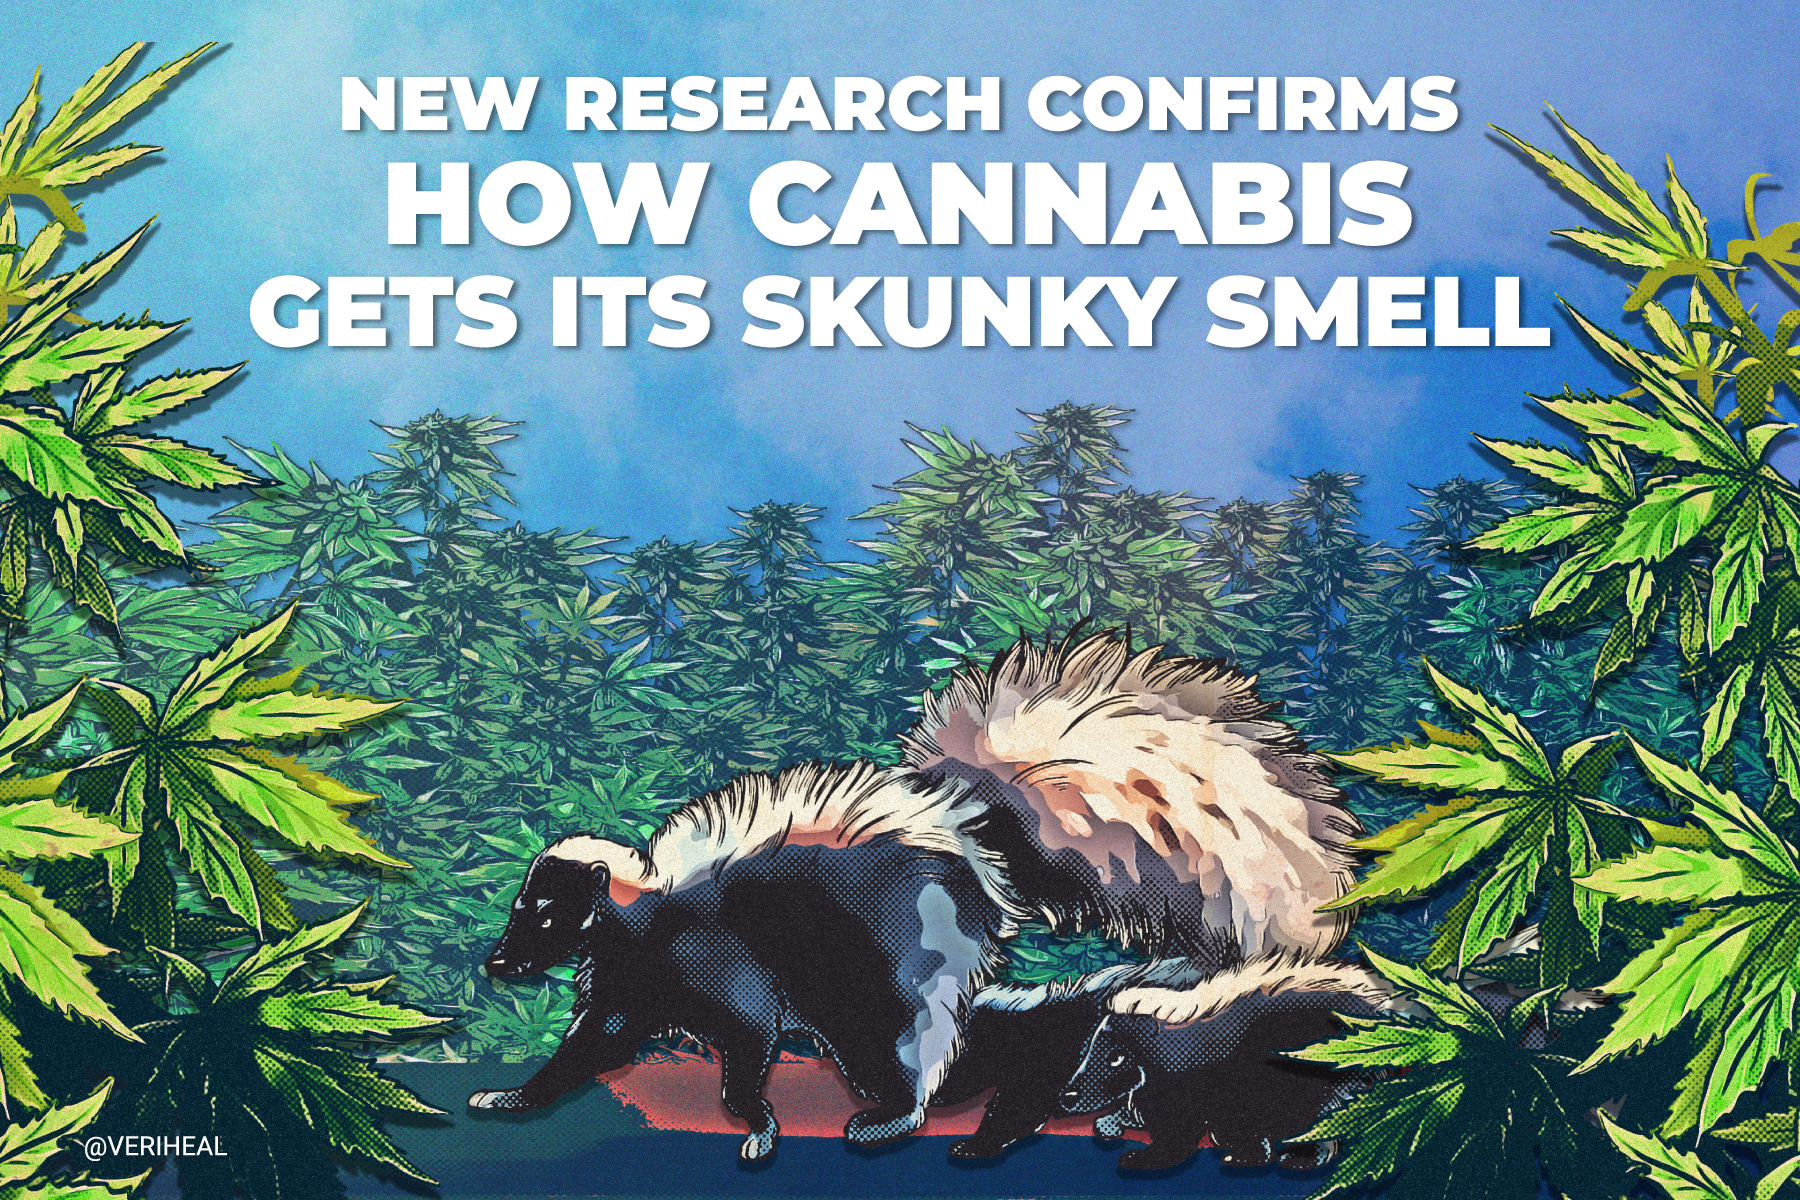 New Research Confirms How Cannabis Gets Its Skunky Smell